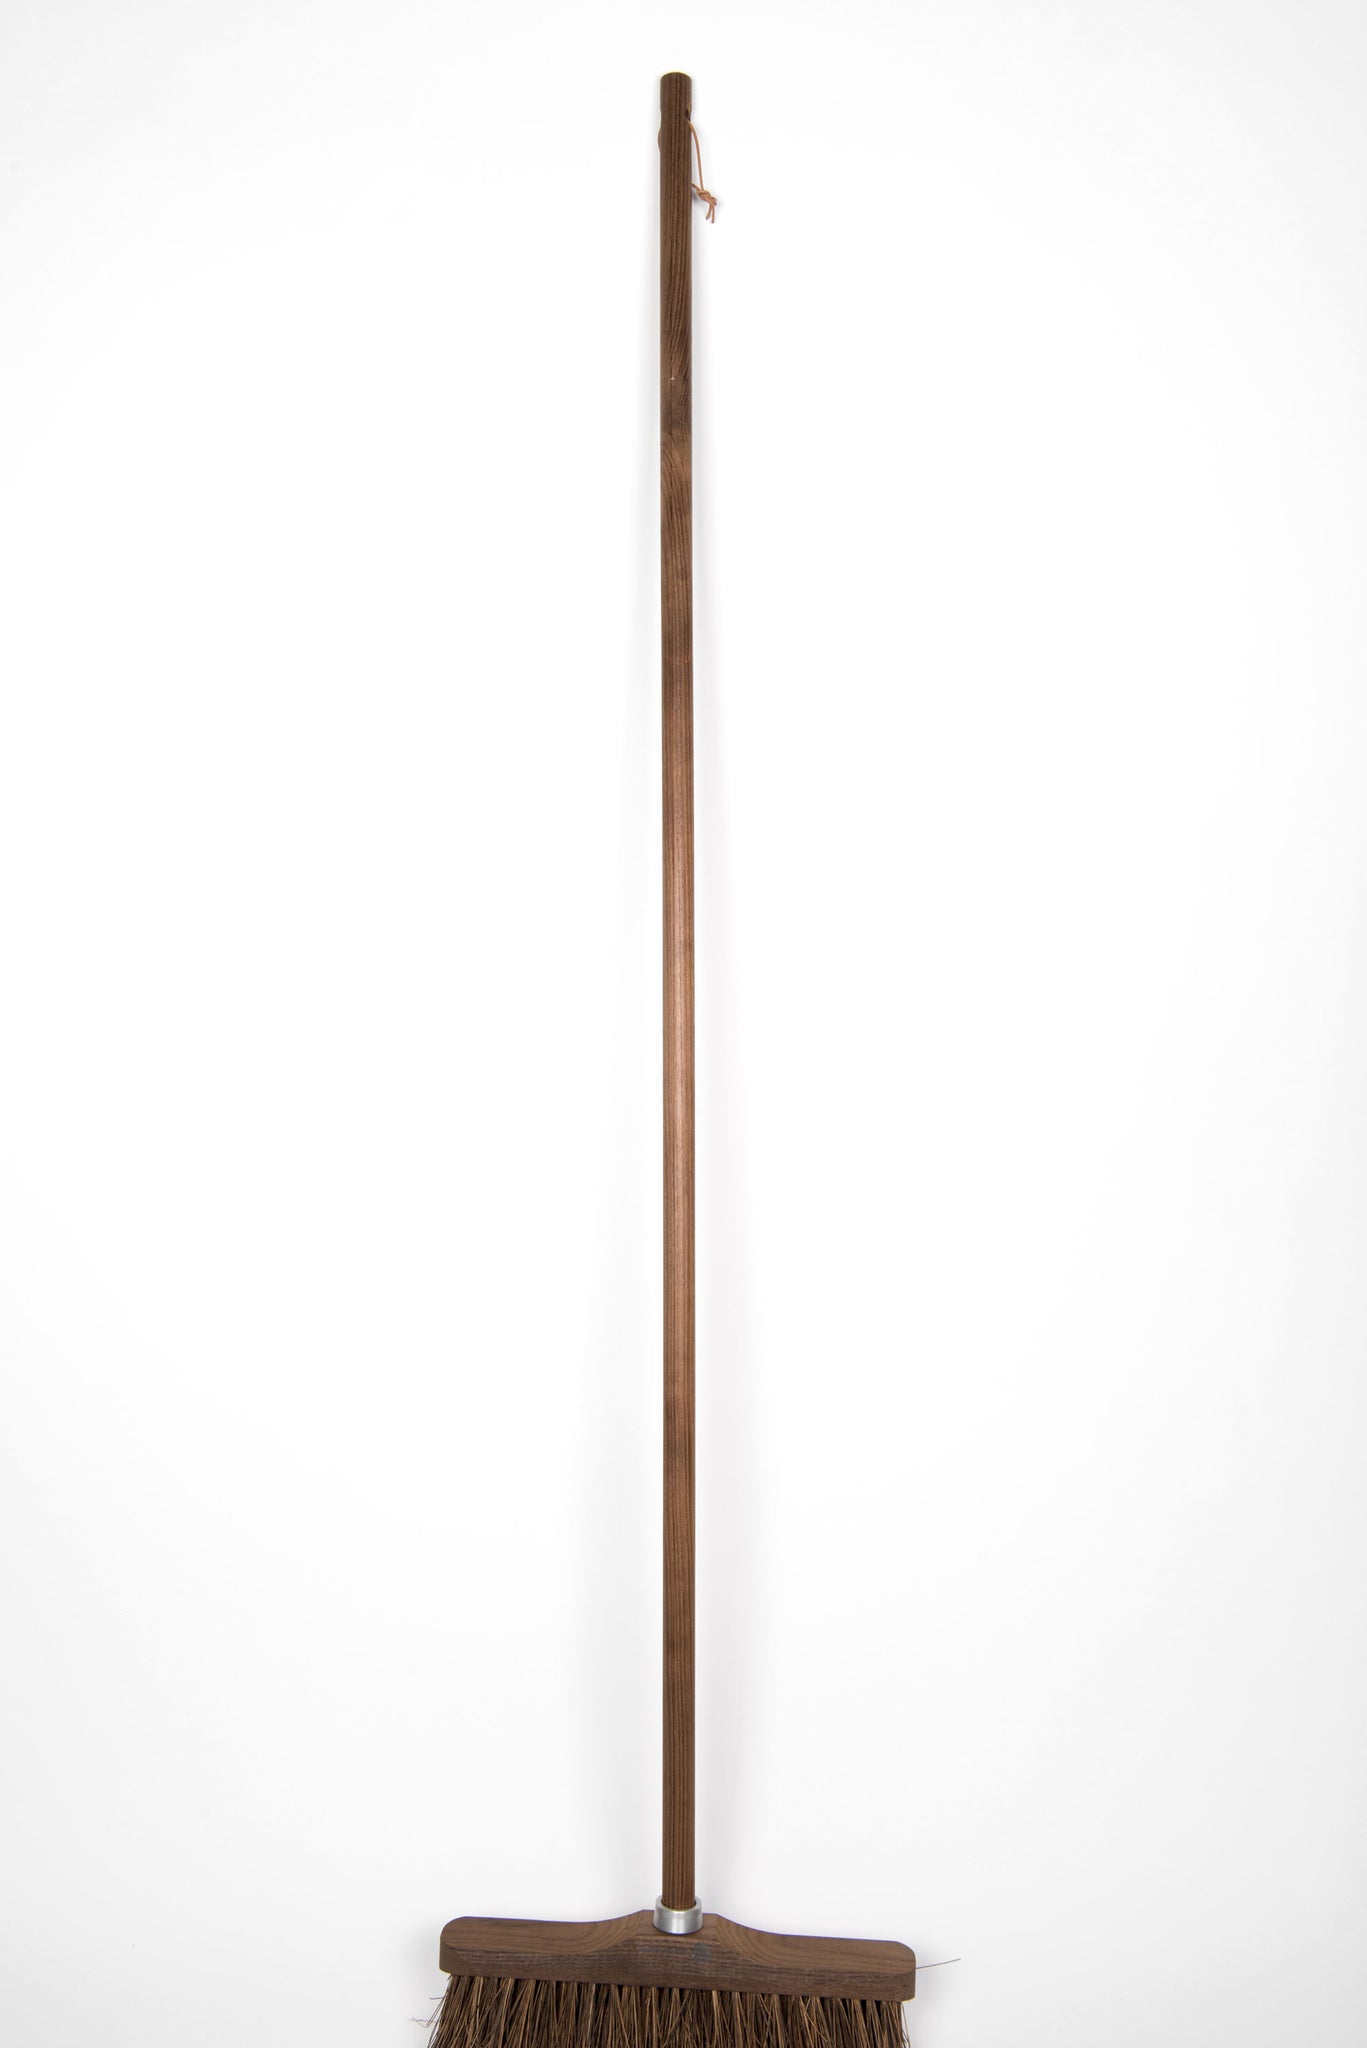 Dark wood broom with natural bristles and leather loop for hanging.